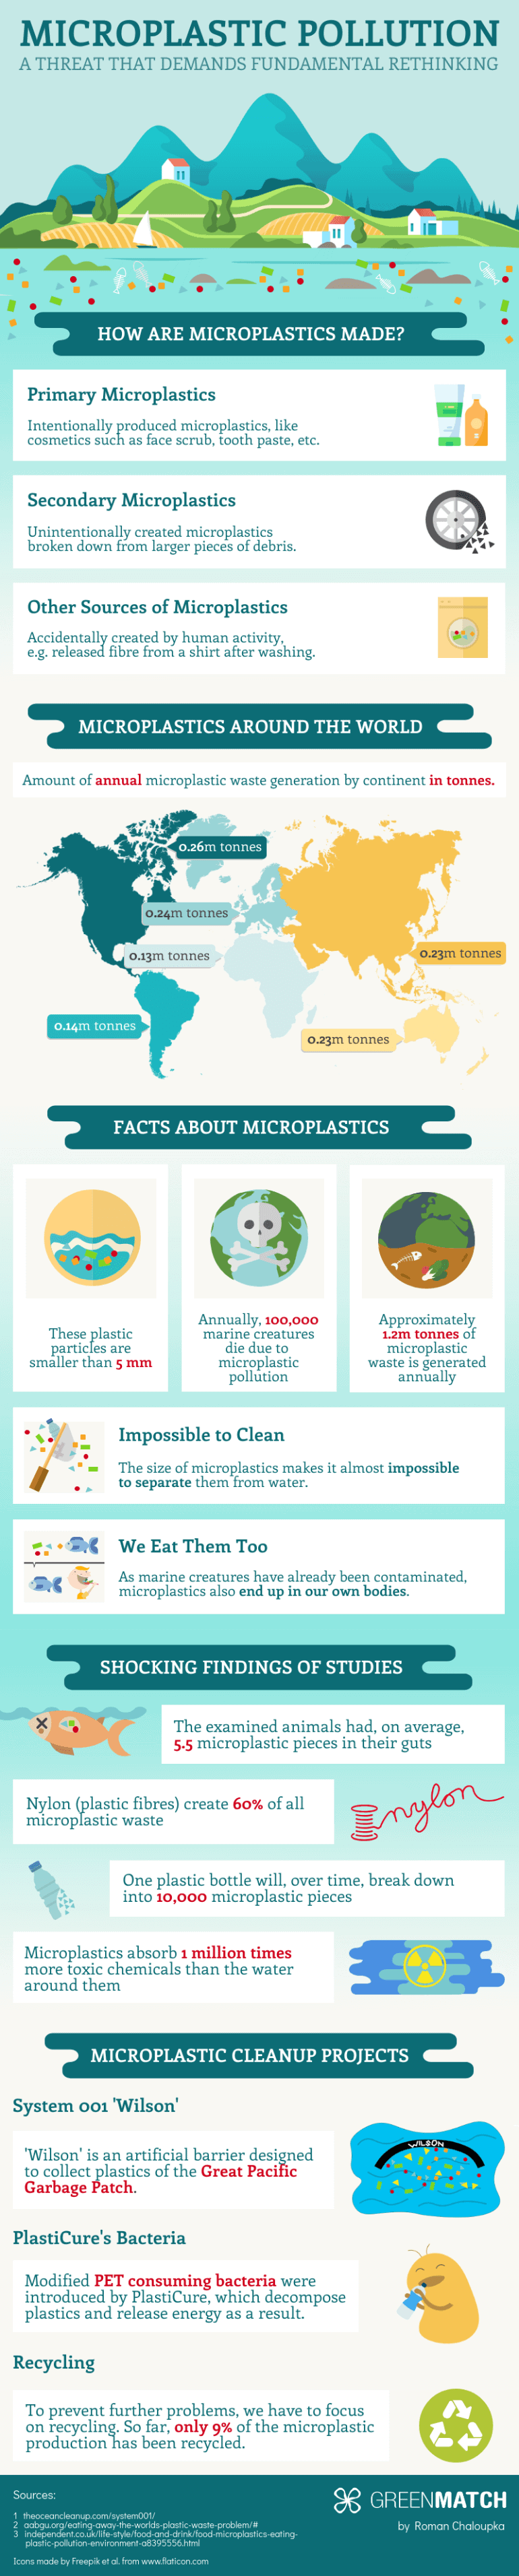 Microplastic Pollution infographic